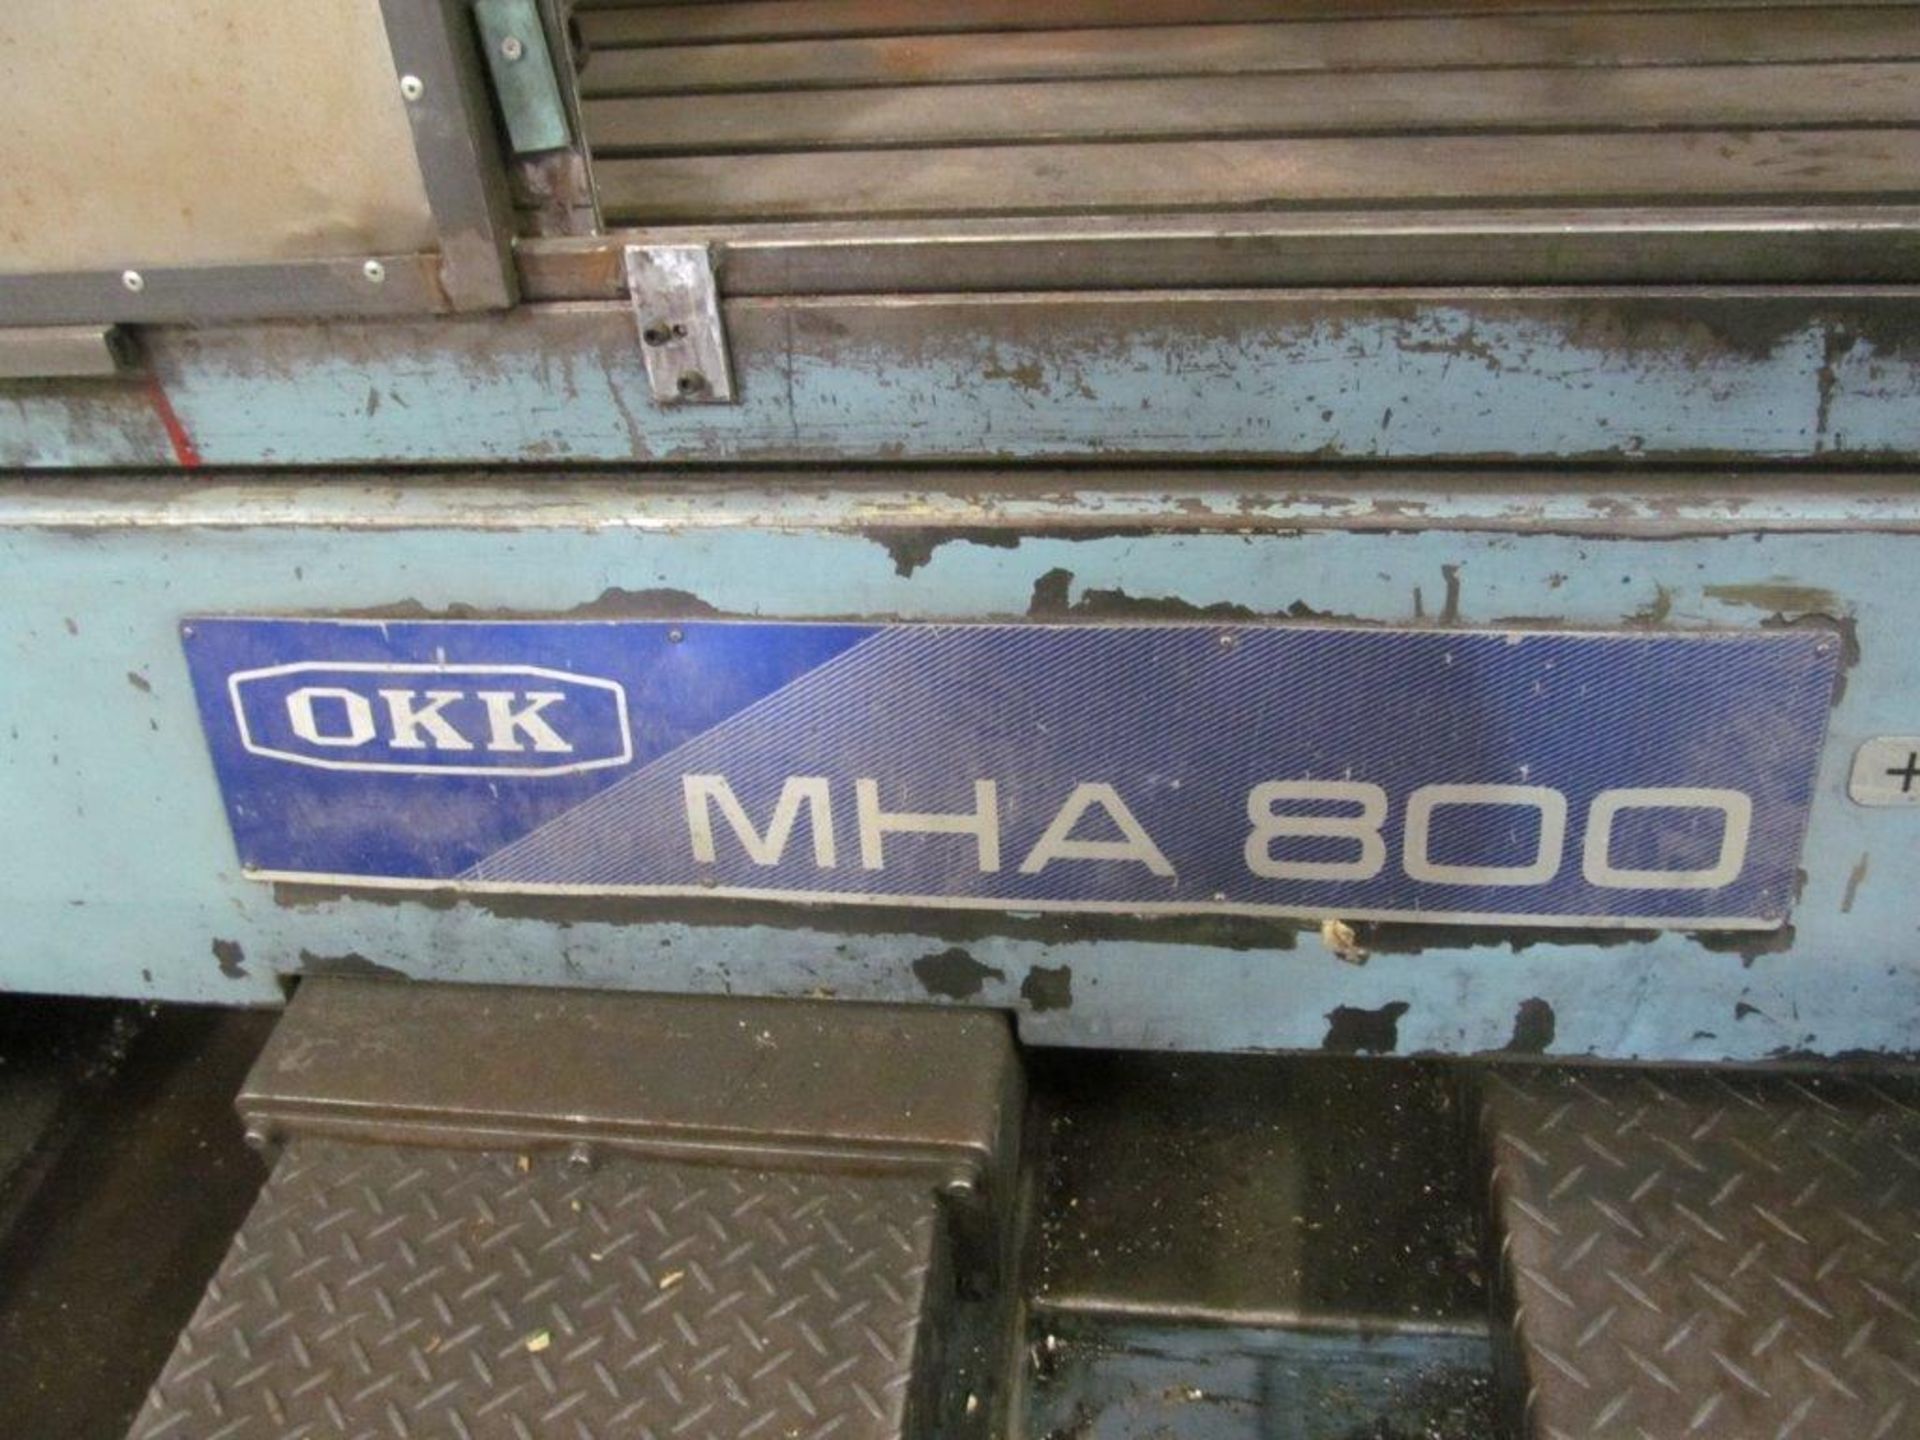 OKK CNC VERTICAL MACHINING CENTER, MHA 800, 33'' X 114'' (IN PLANT) - LOCATION, MONTREAL, QUEBEC - Image 6 of 7